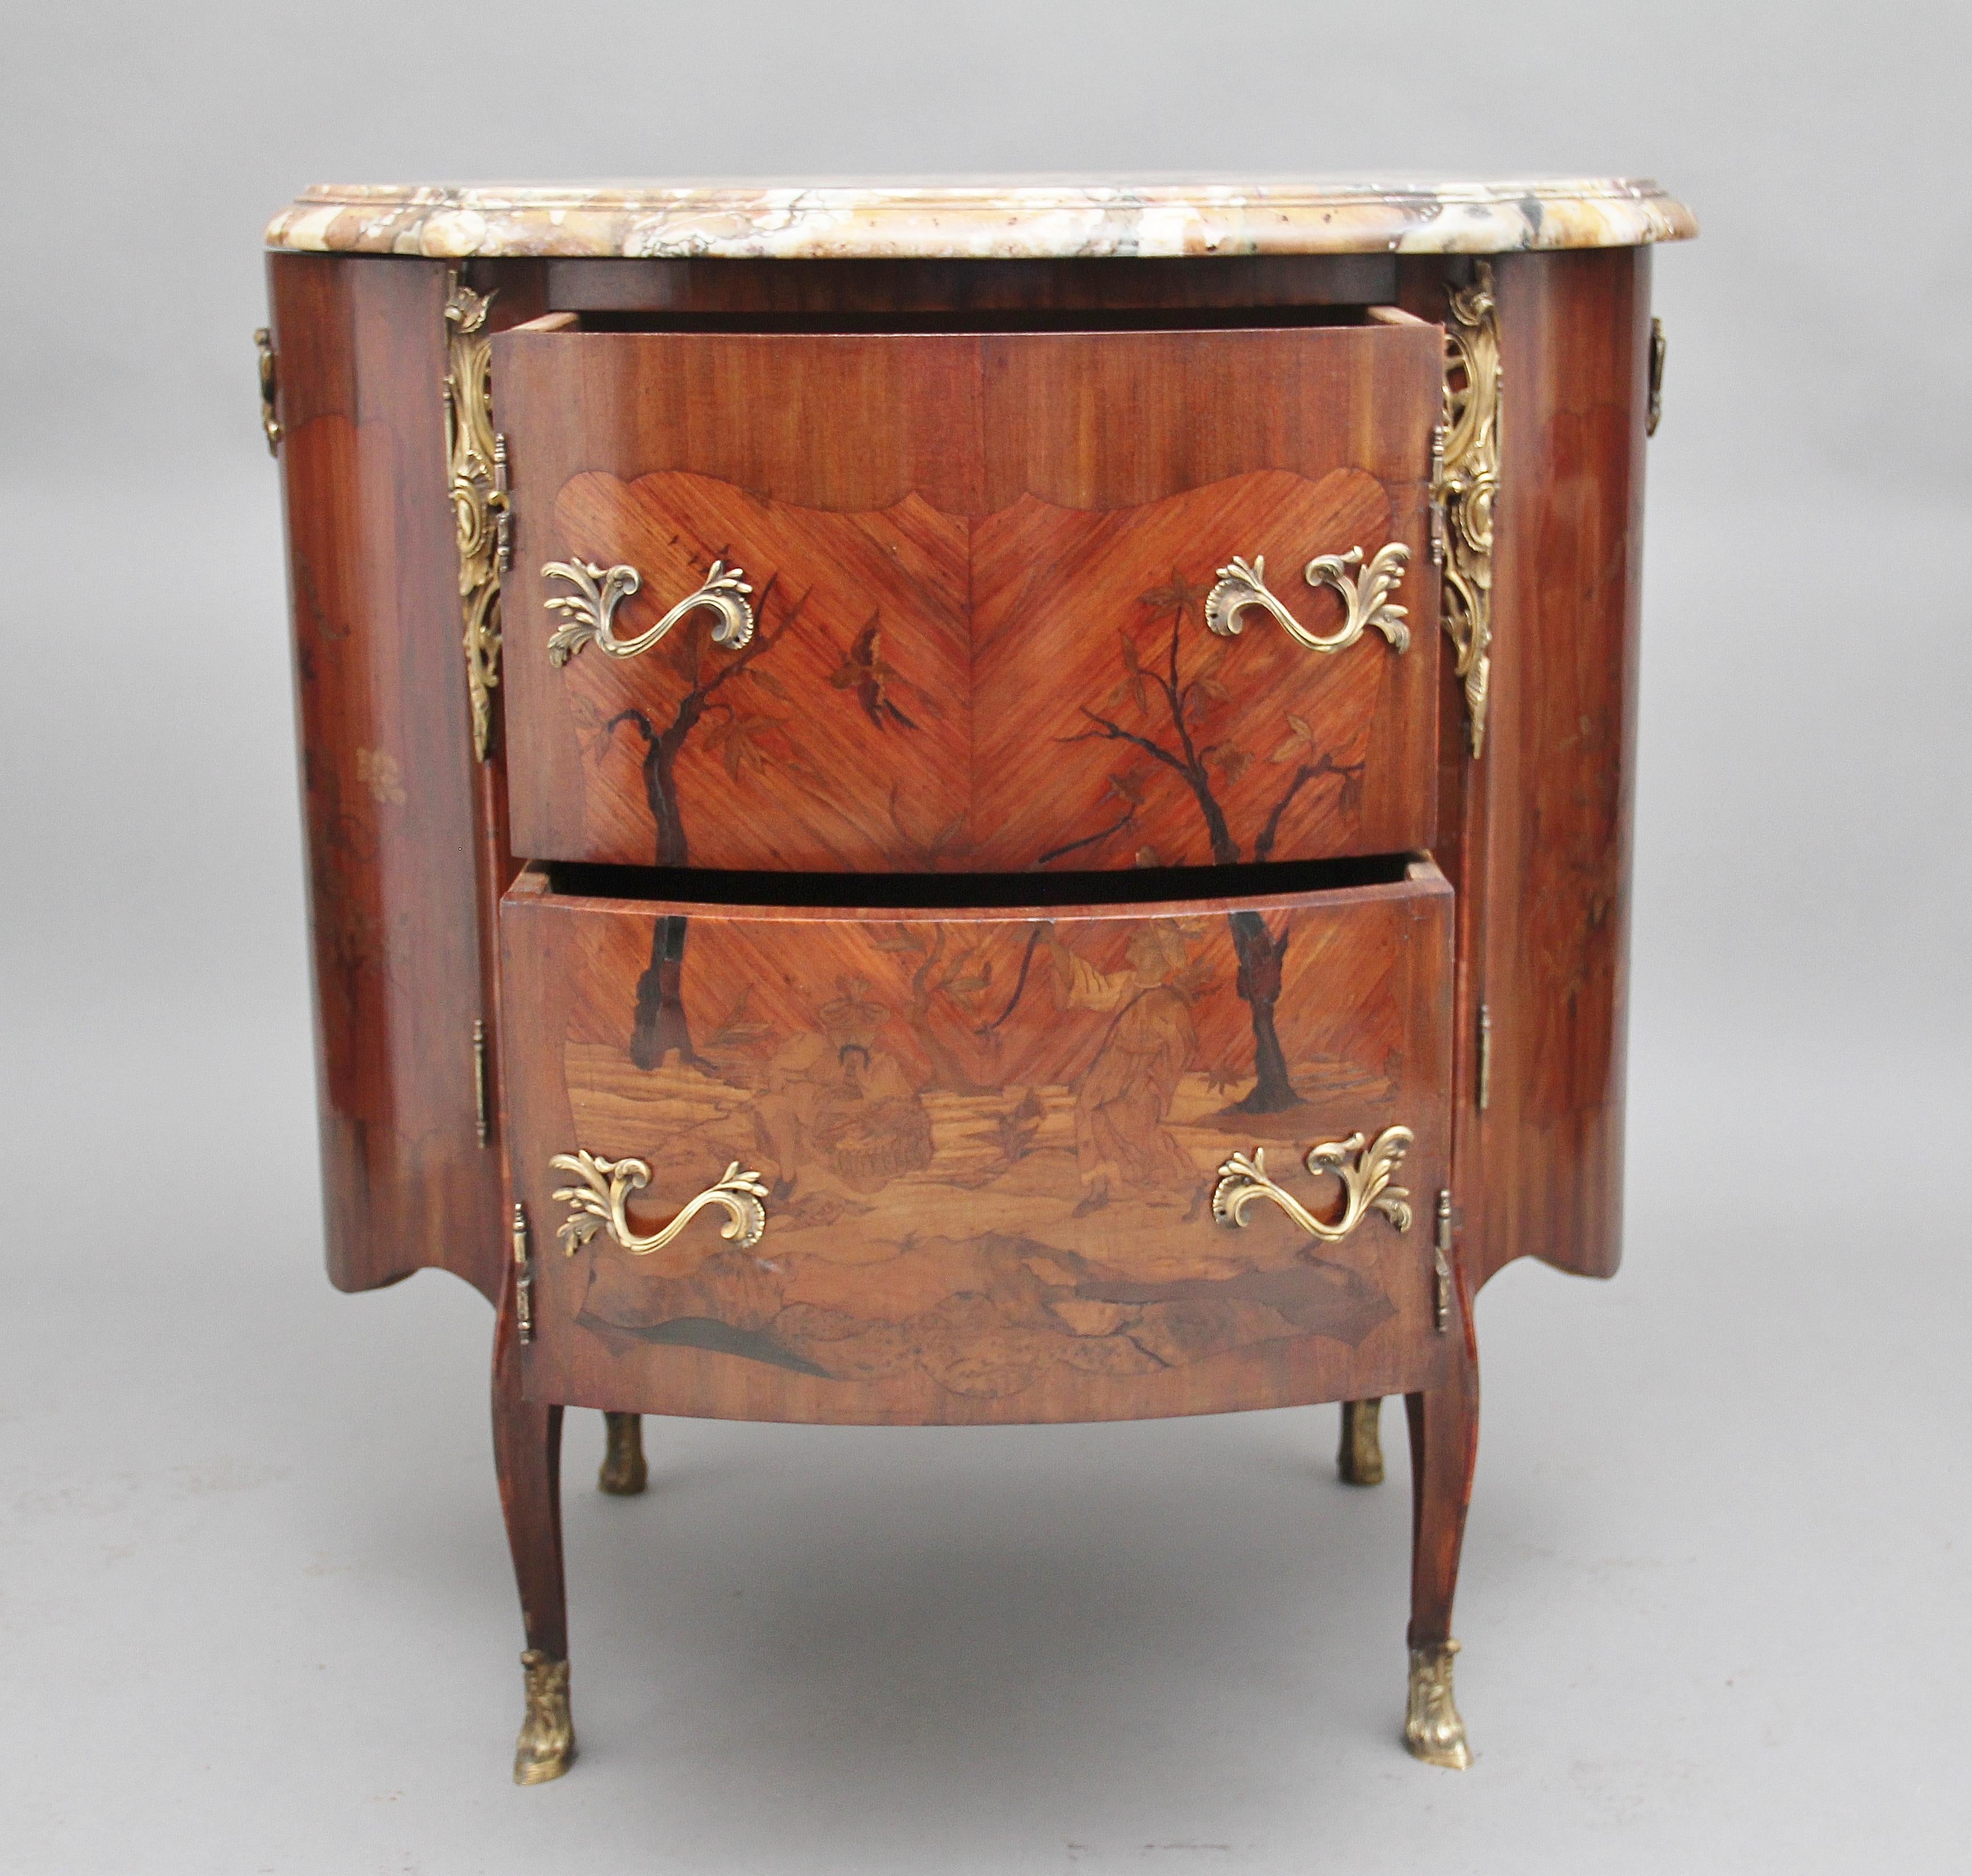 An unusual and rare early 19th century bow ended freestanding French marquetry marble top cabinet / stand made from tulip wood and inlaid with exotic woods, having the original white and grey moulded edge and shaped marble top, lovely marquetry